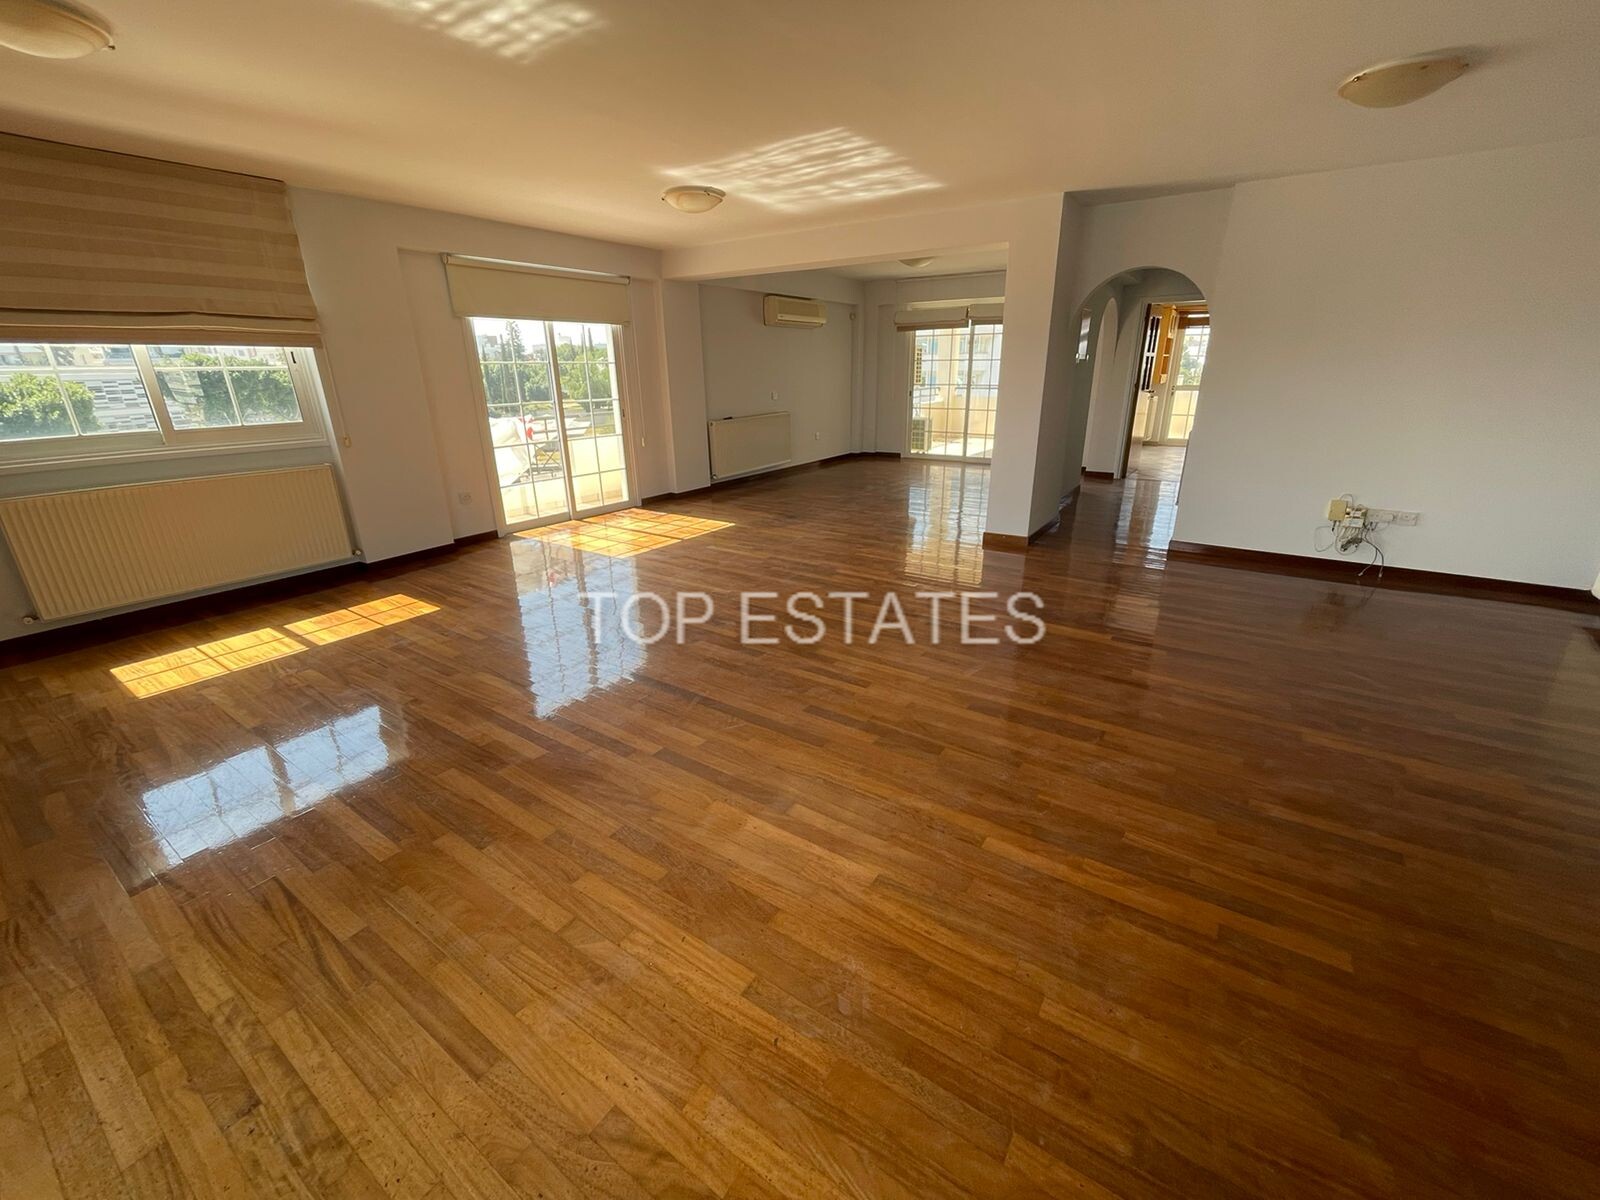 For Sale 3 bedrooms whole floor apartment in Nicosia